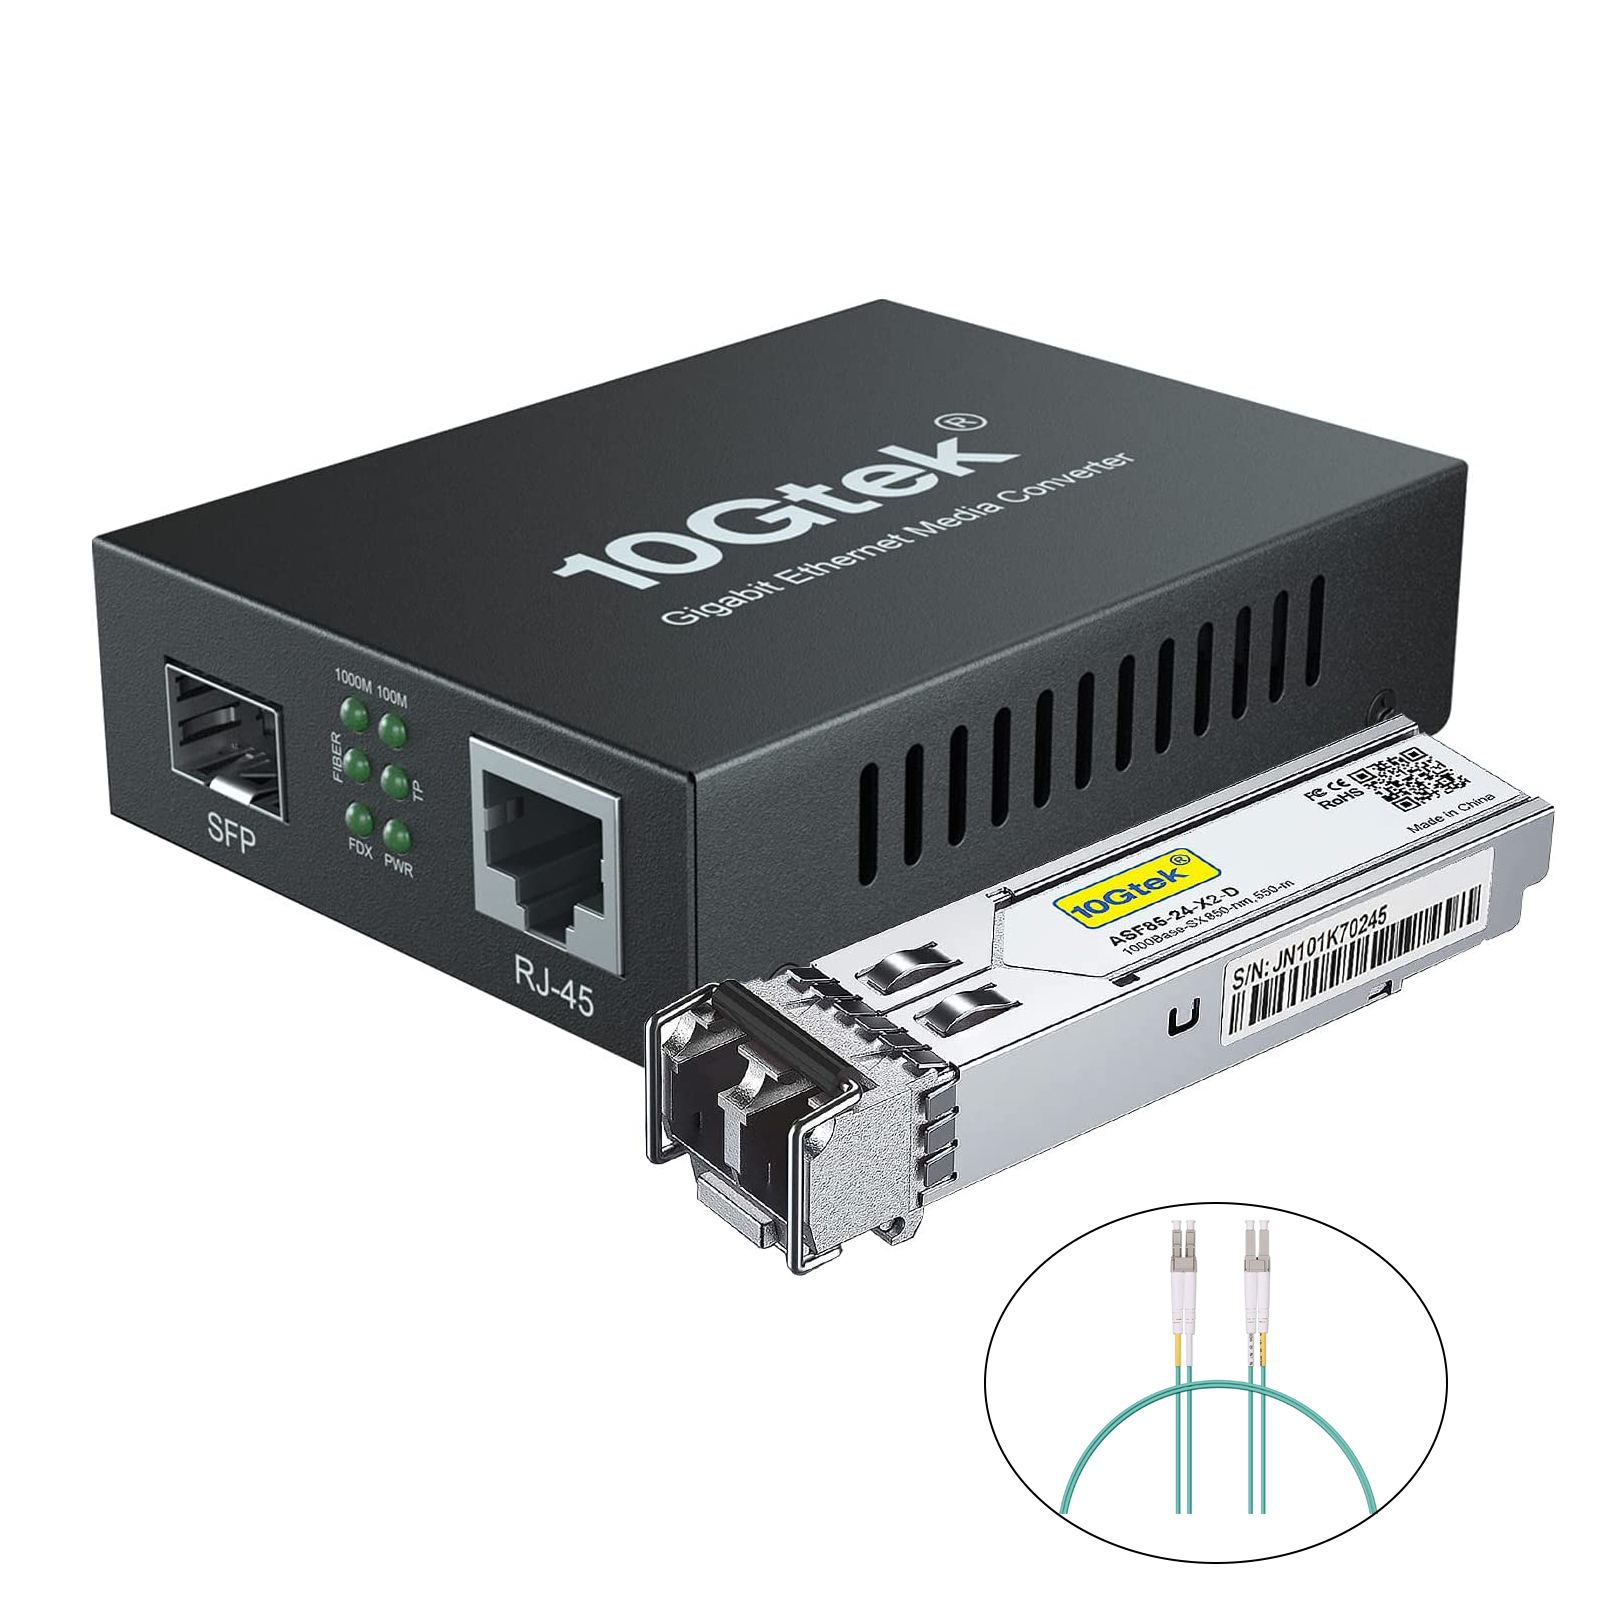 Gigabit Ethernet Media Converter, MultiMode Dual LC Fiber to Ethernet RJ45  Converter for 10/100/1000Base-Tx to 1000Base-SX(with a SFP MMF 850-nm  Module), UL Certified, up to 550-m